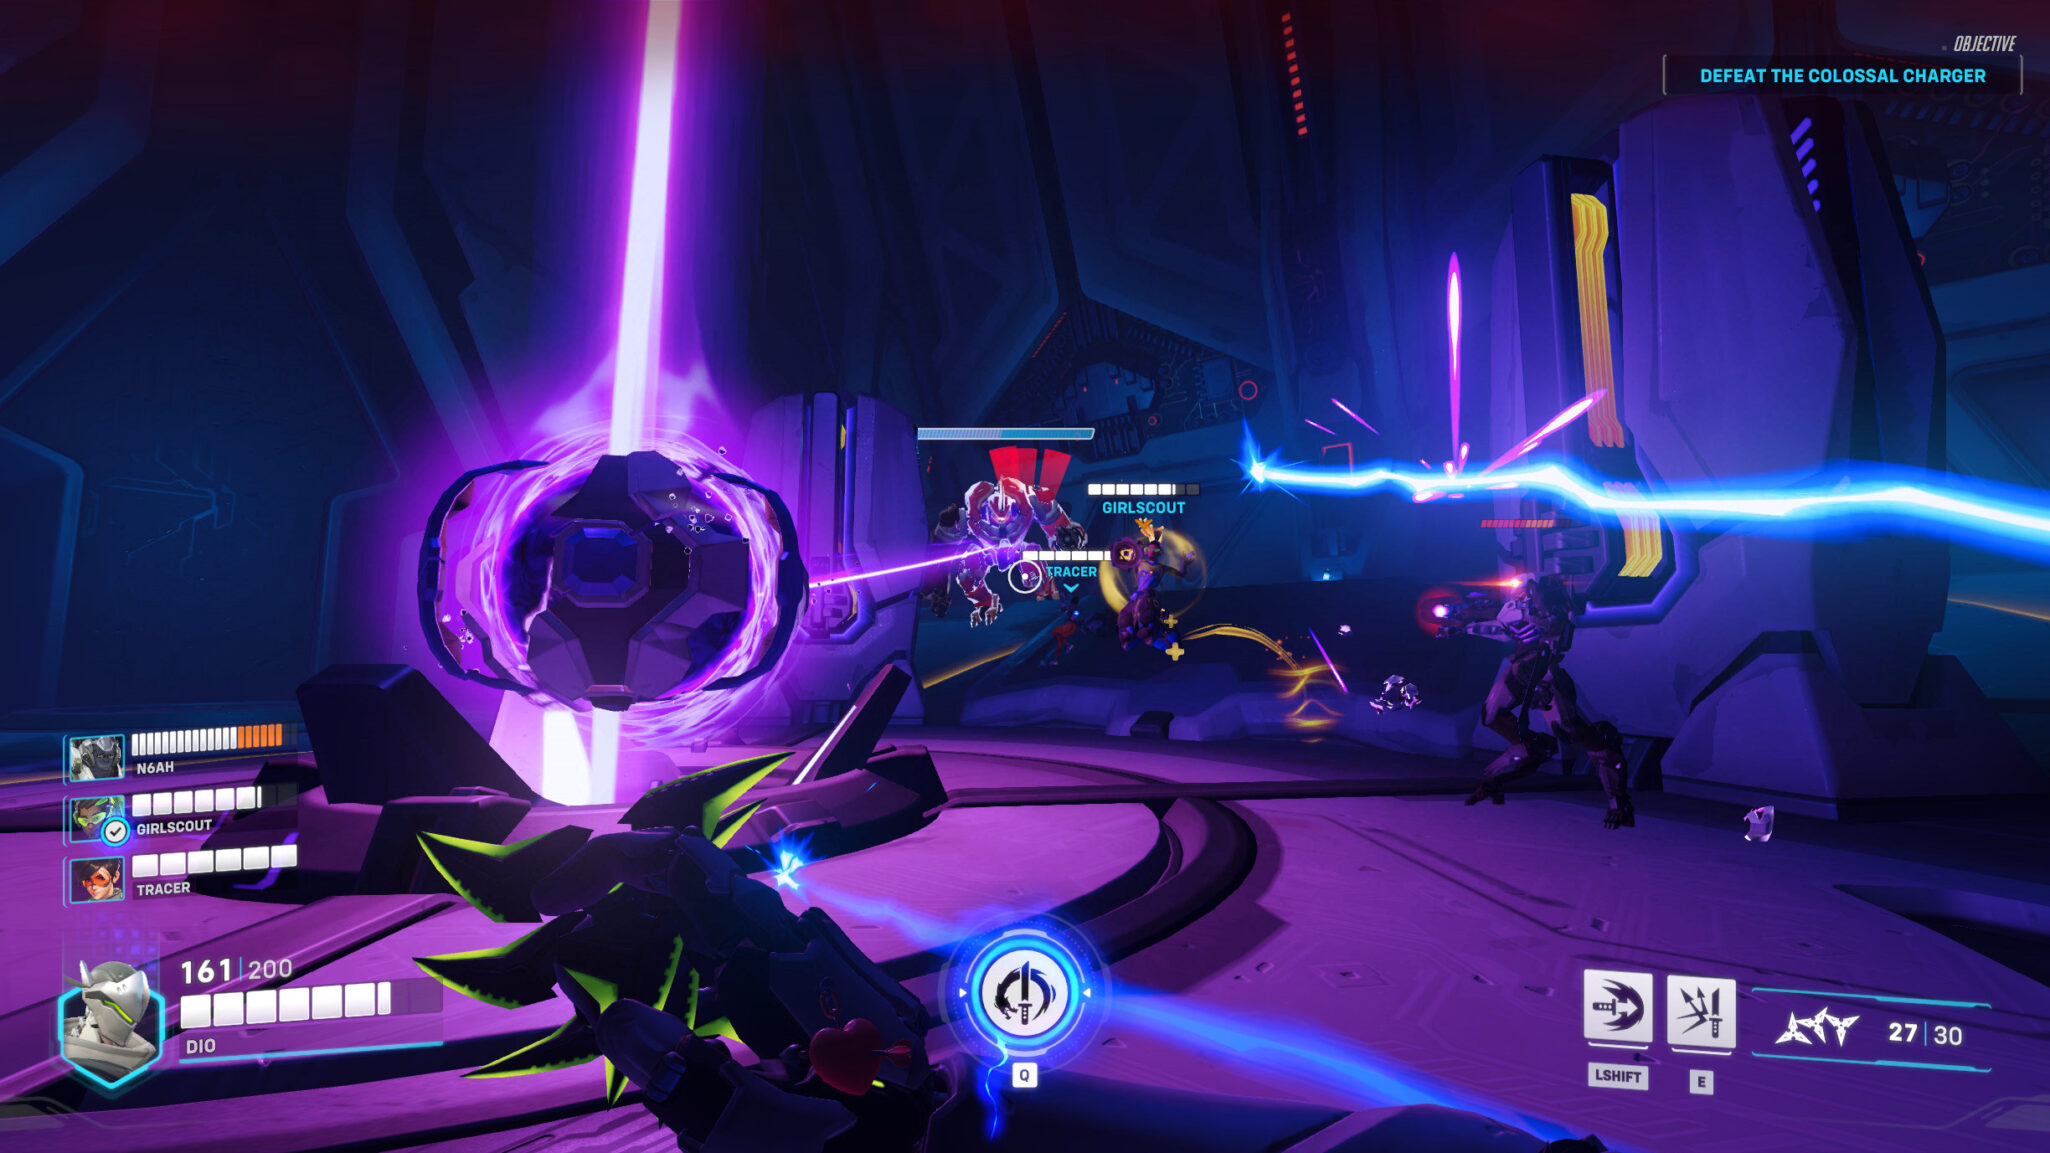 Overwatch 2 Colossal Charger screenshot